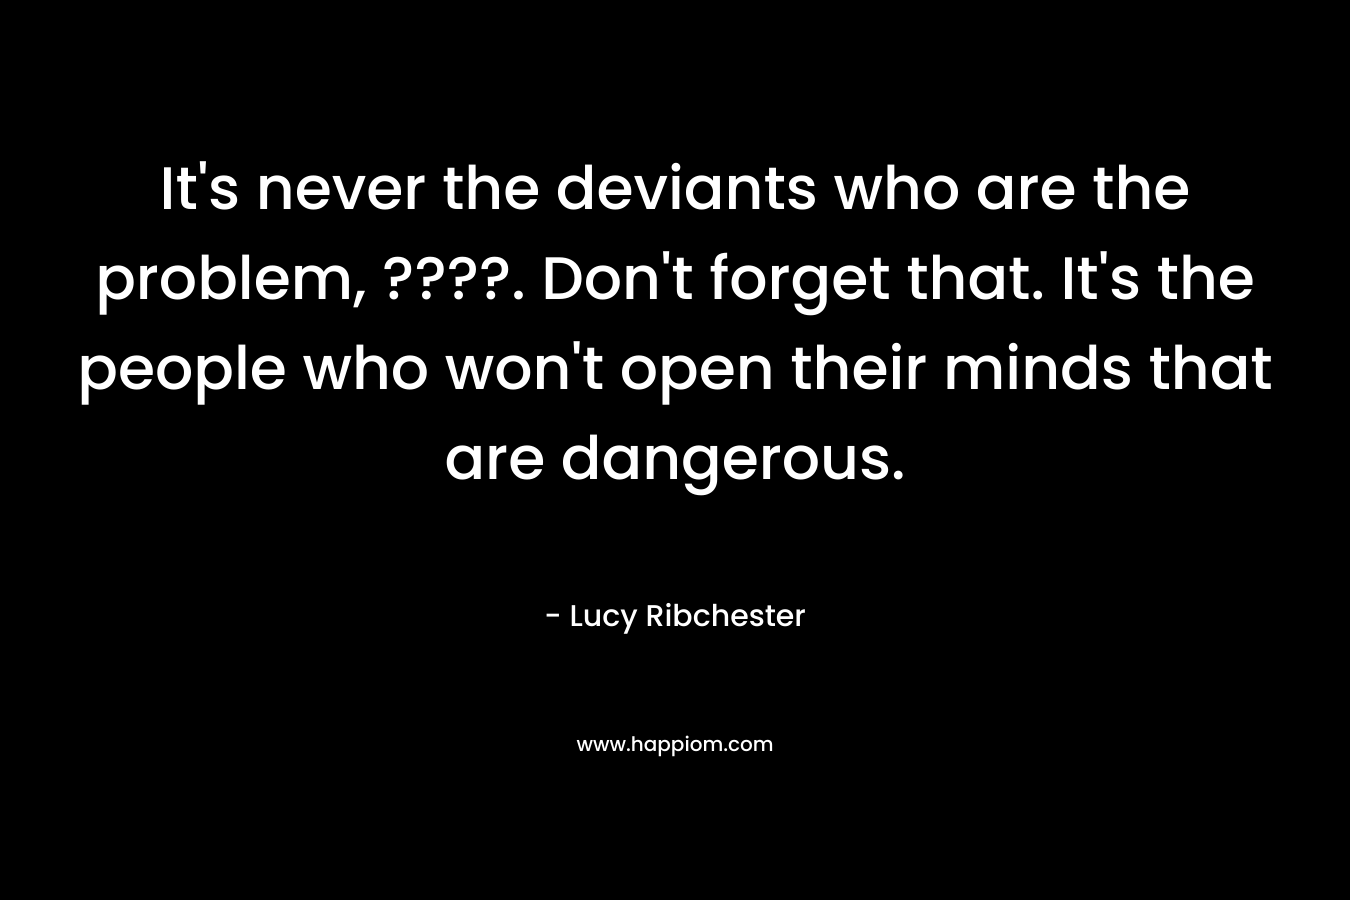 It's never the deviants who are the problem, ????. Don't forget that. It's the people who won't open their minds that are dangerous.